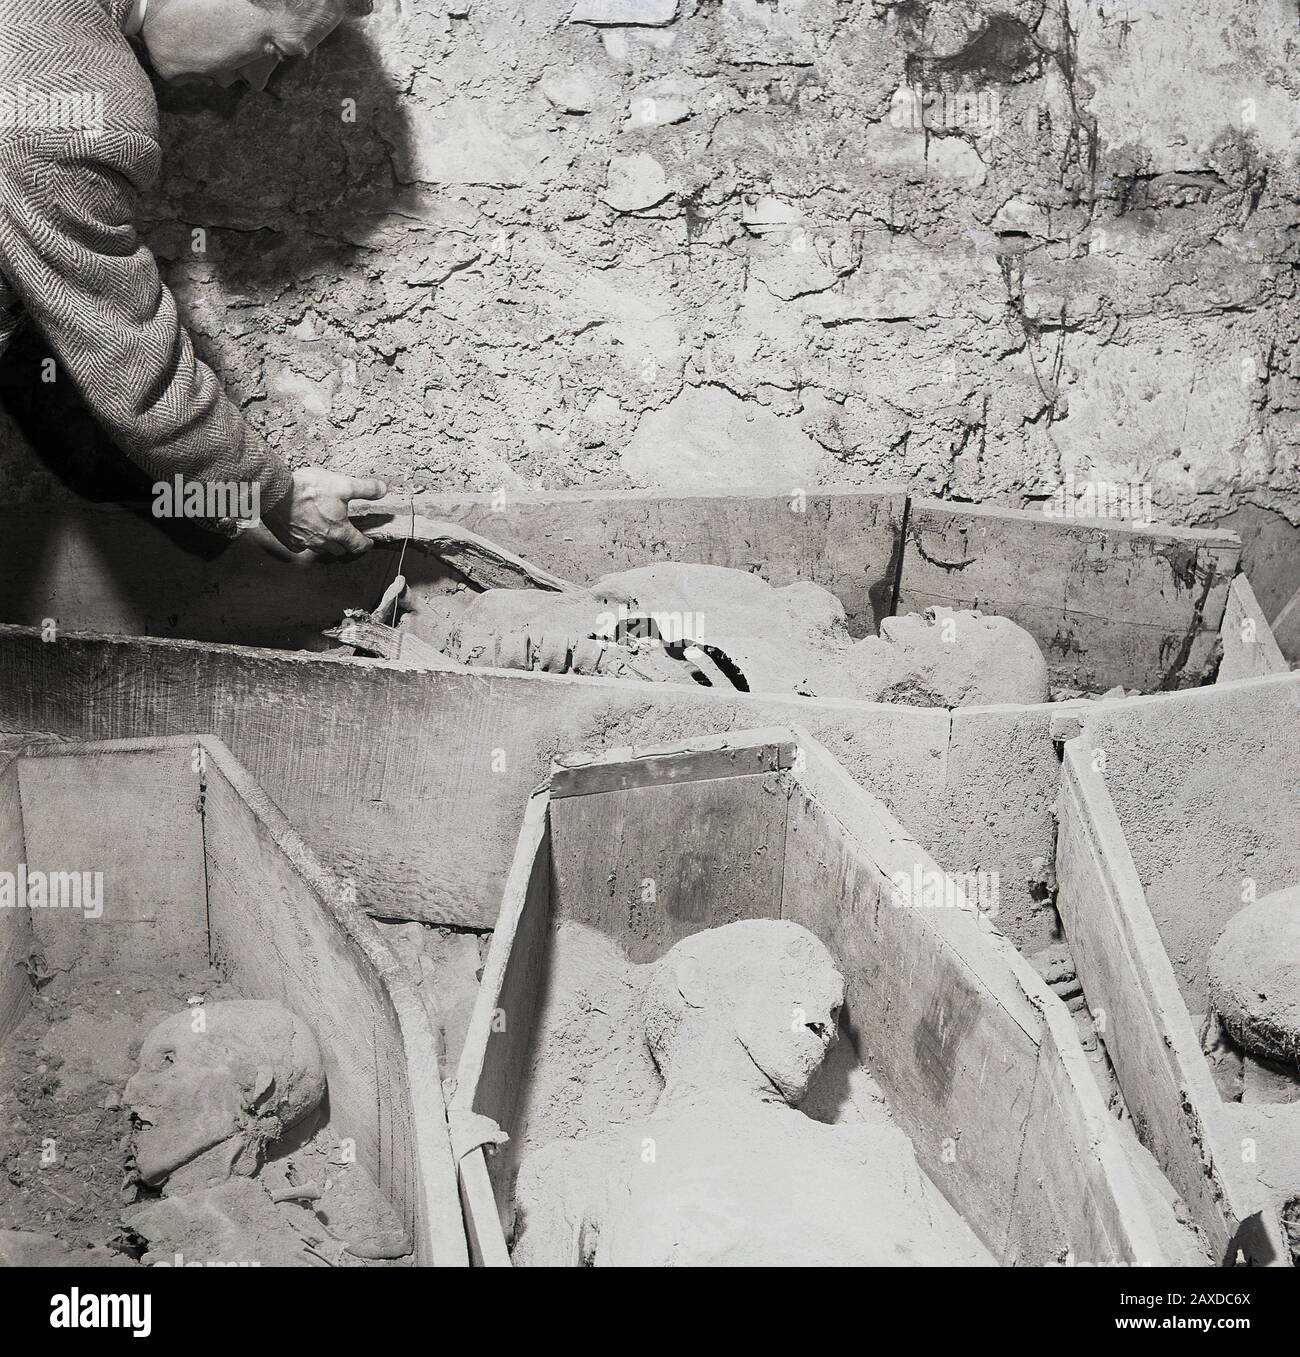 1950s, historical, burial site....a man looking at old dead bodies in open wooden coffins, Ireland. Stock Photo